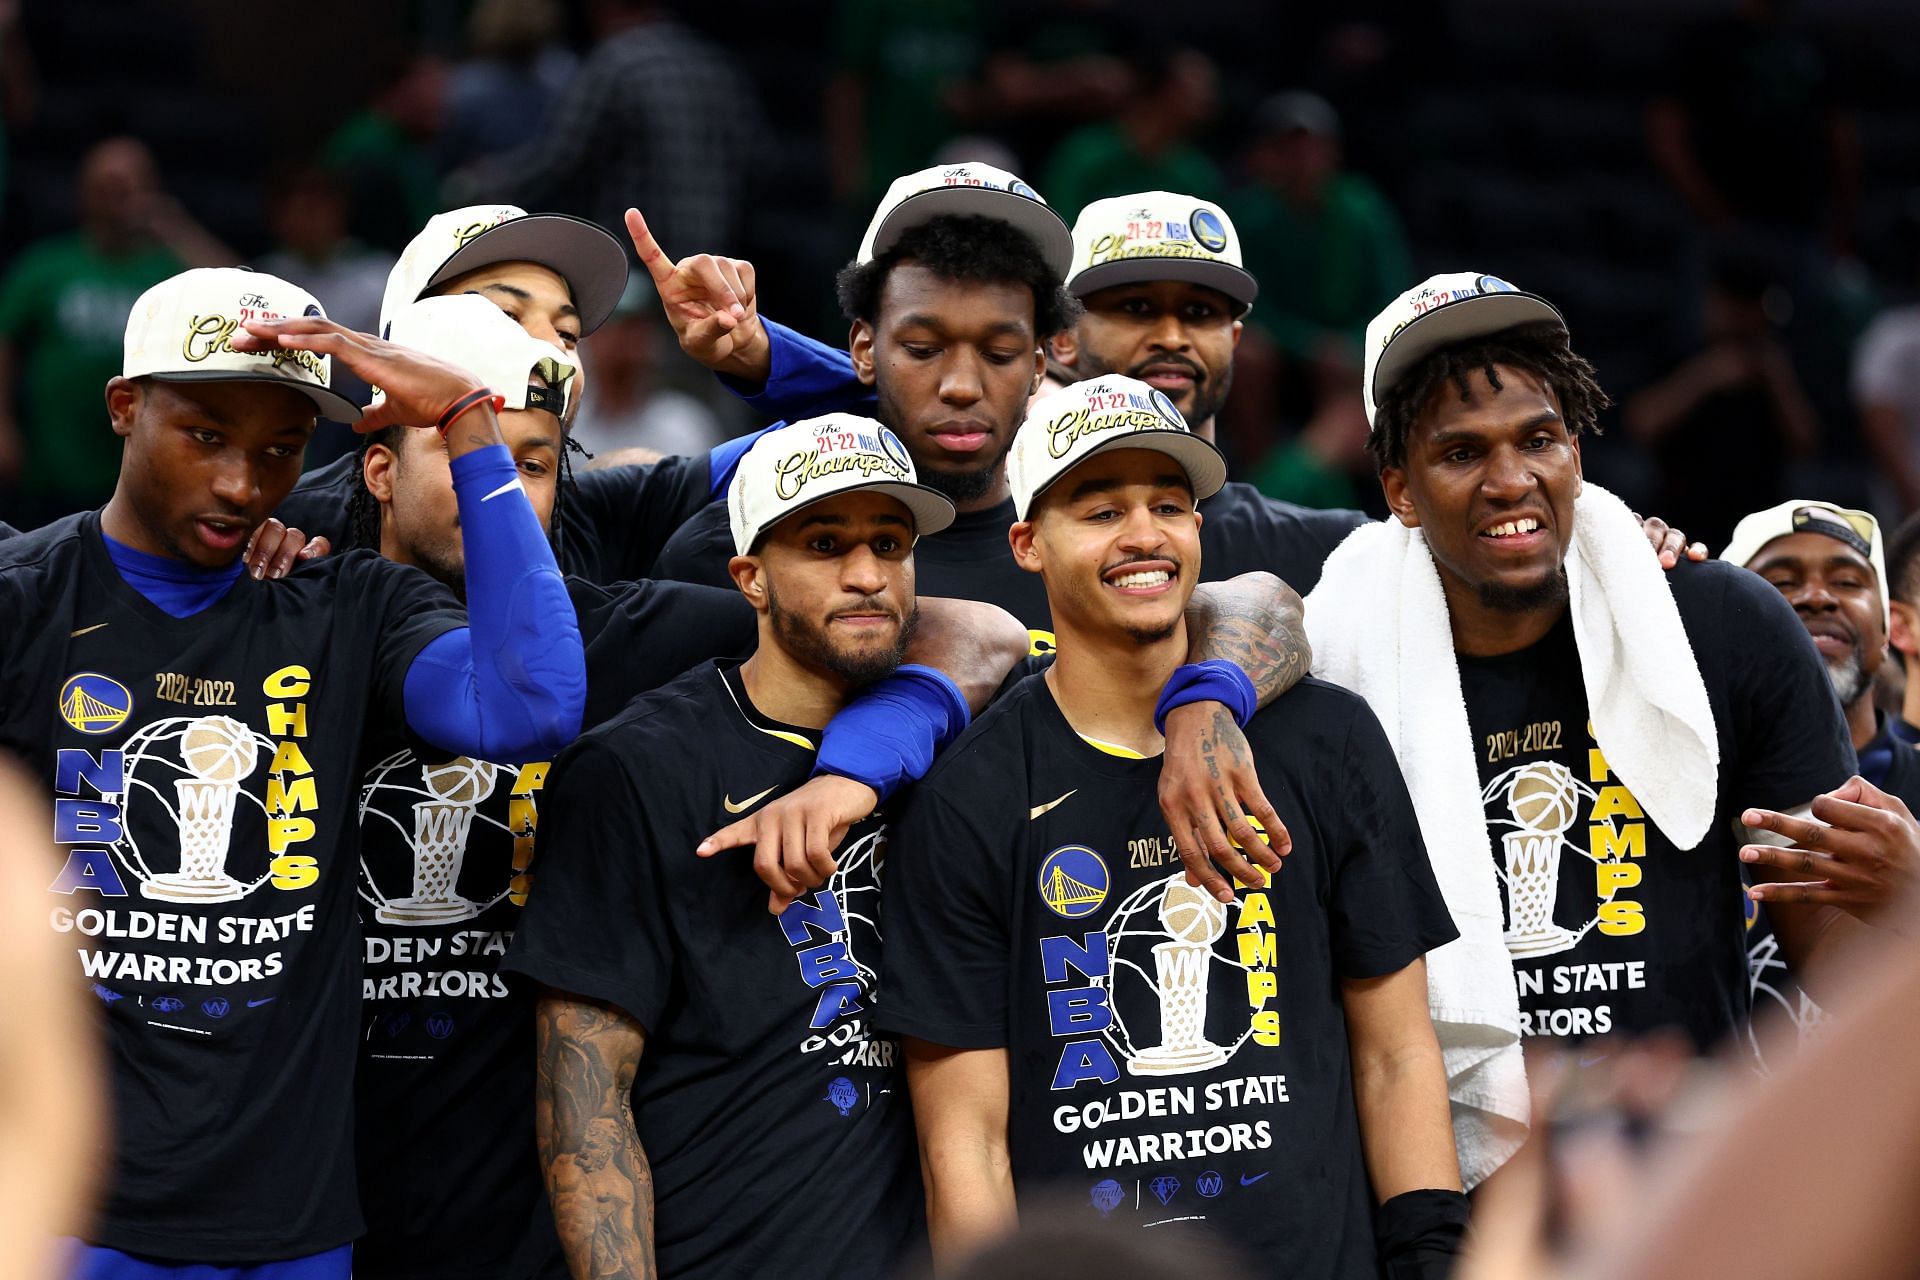 The Golden State Warriors pose for a photo after winning the 2022 NBA Finals